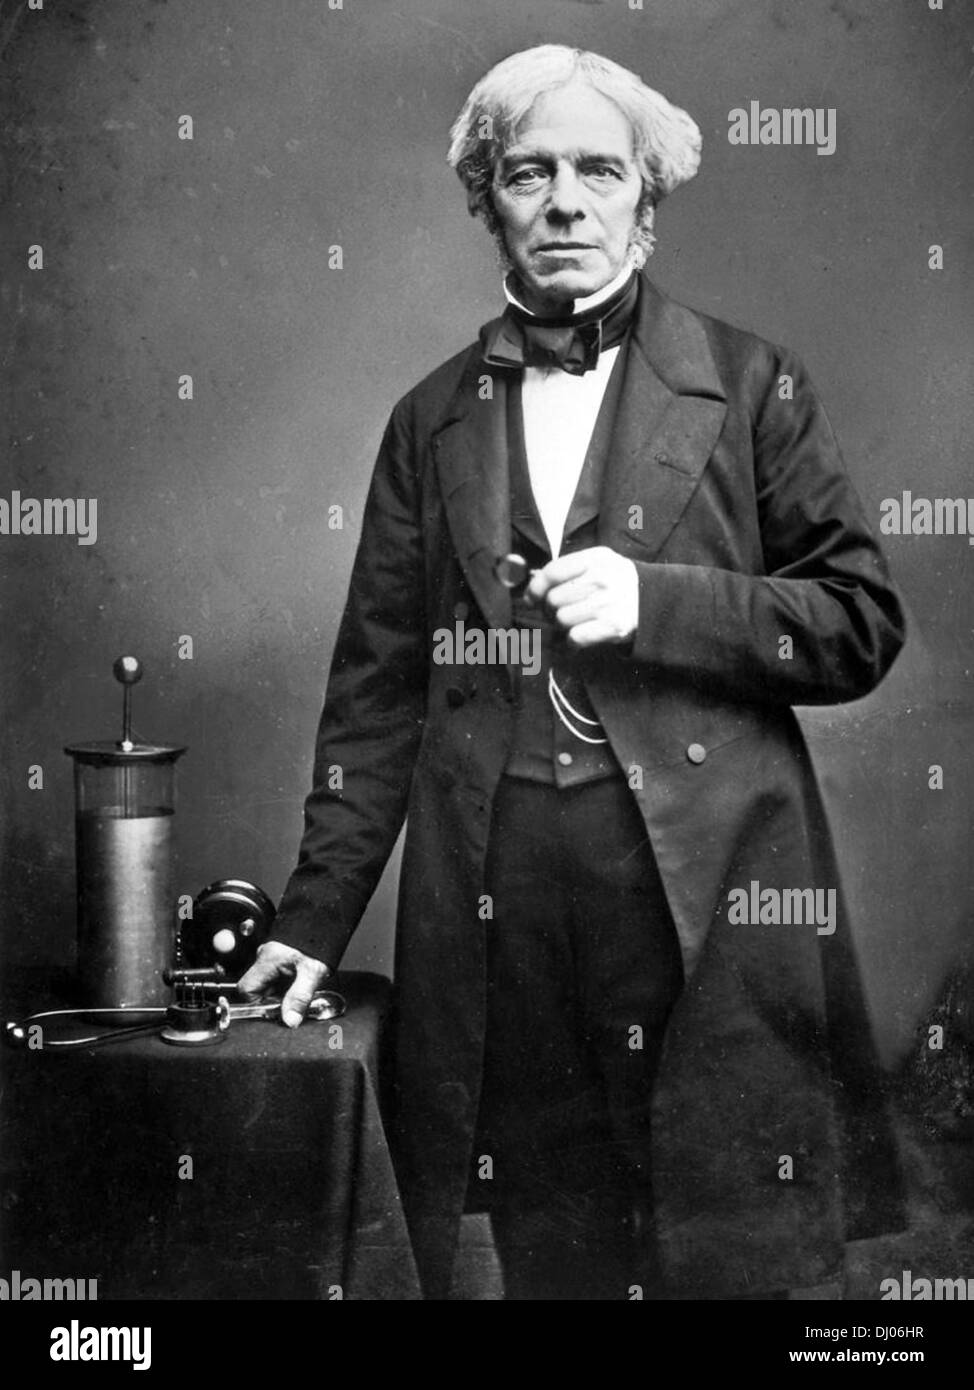 Michael faraday Black and White Stock Photos Images   Alamy